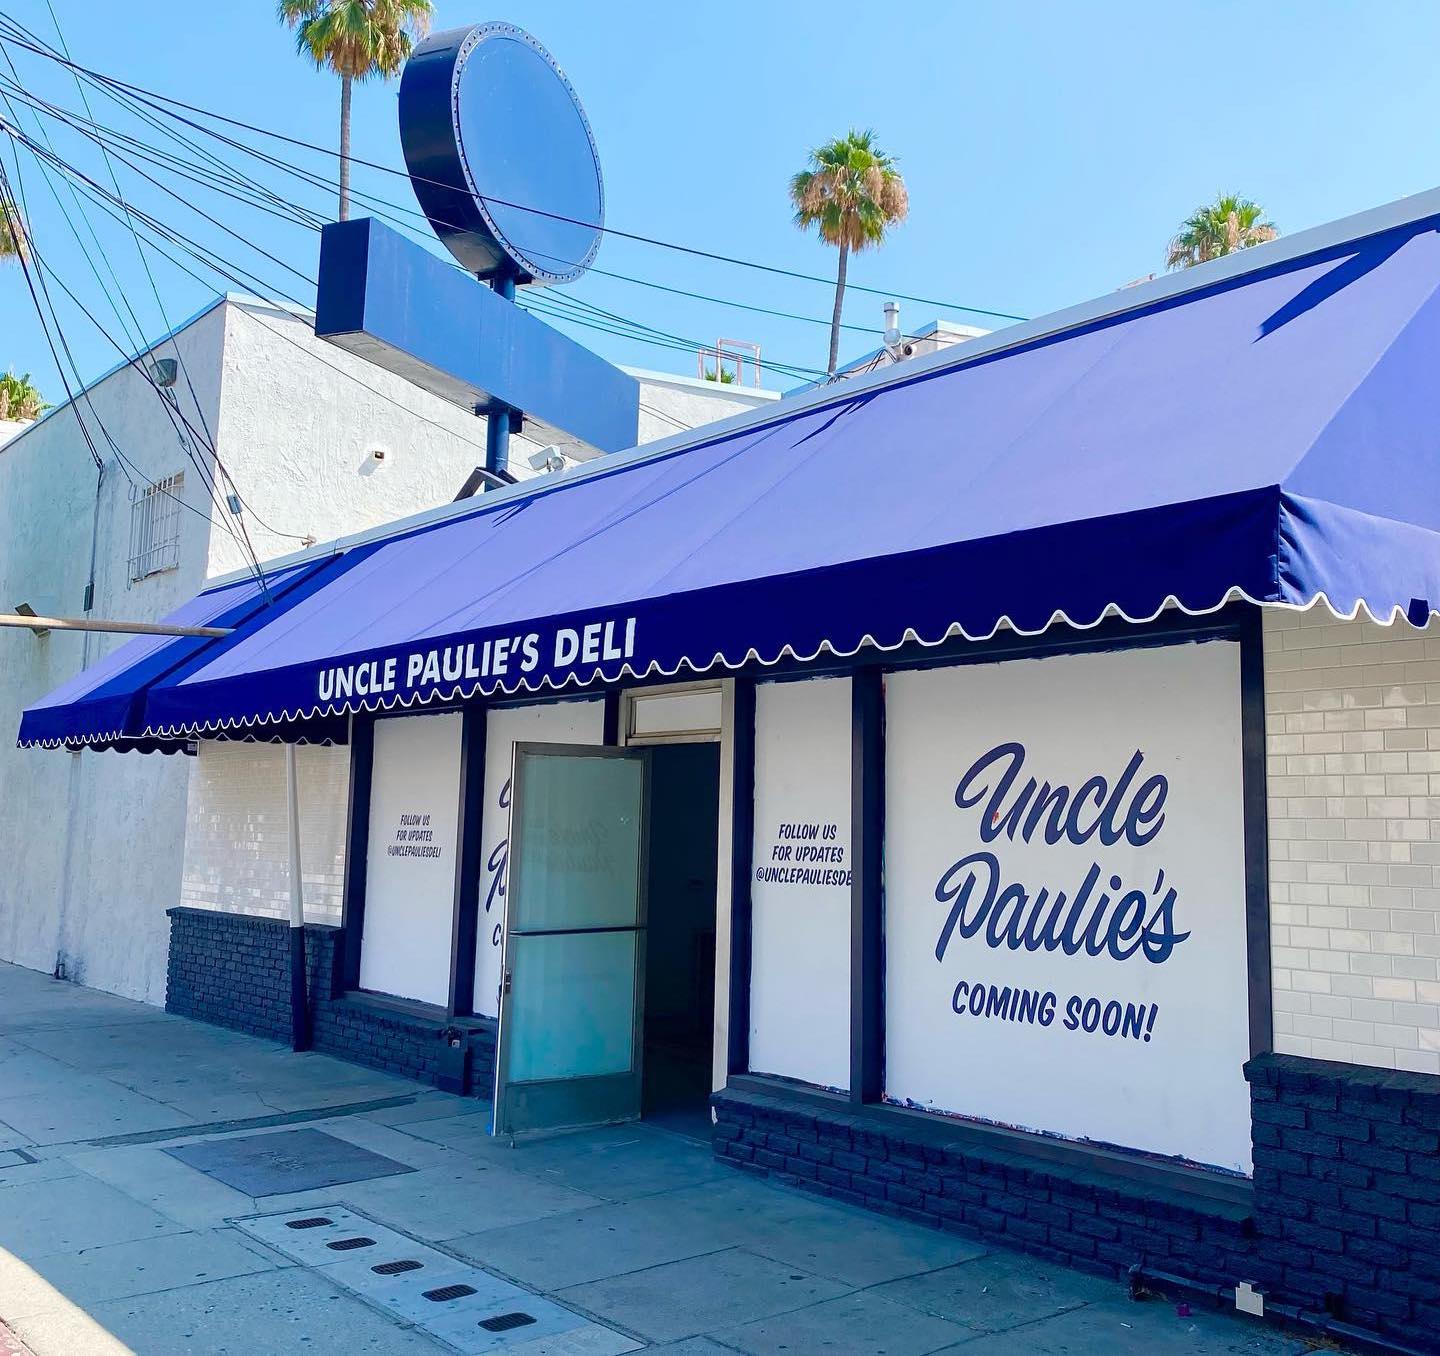 A daytime exterior of a blue deli restaurant with white tones.